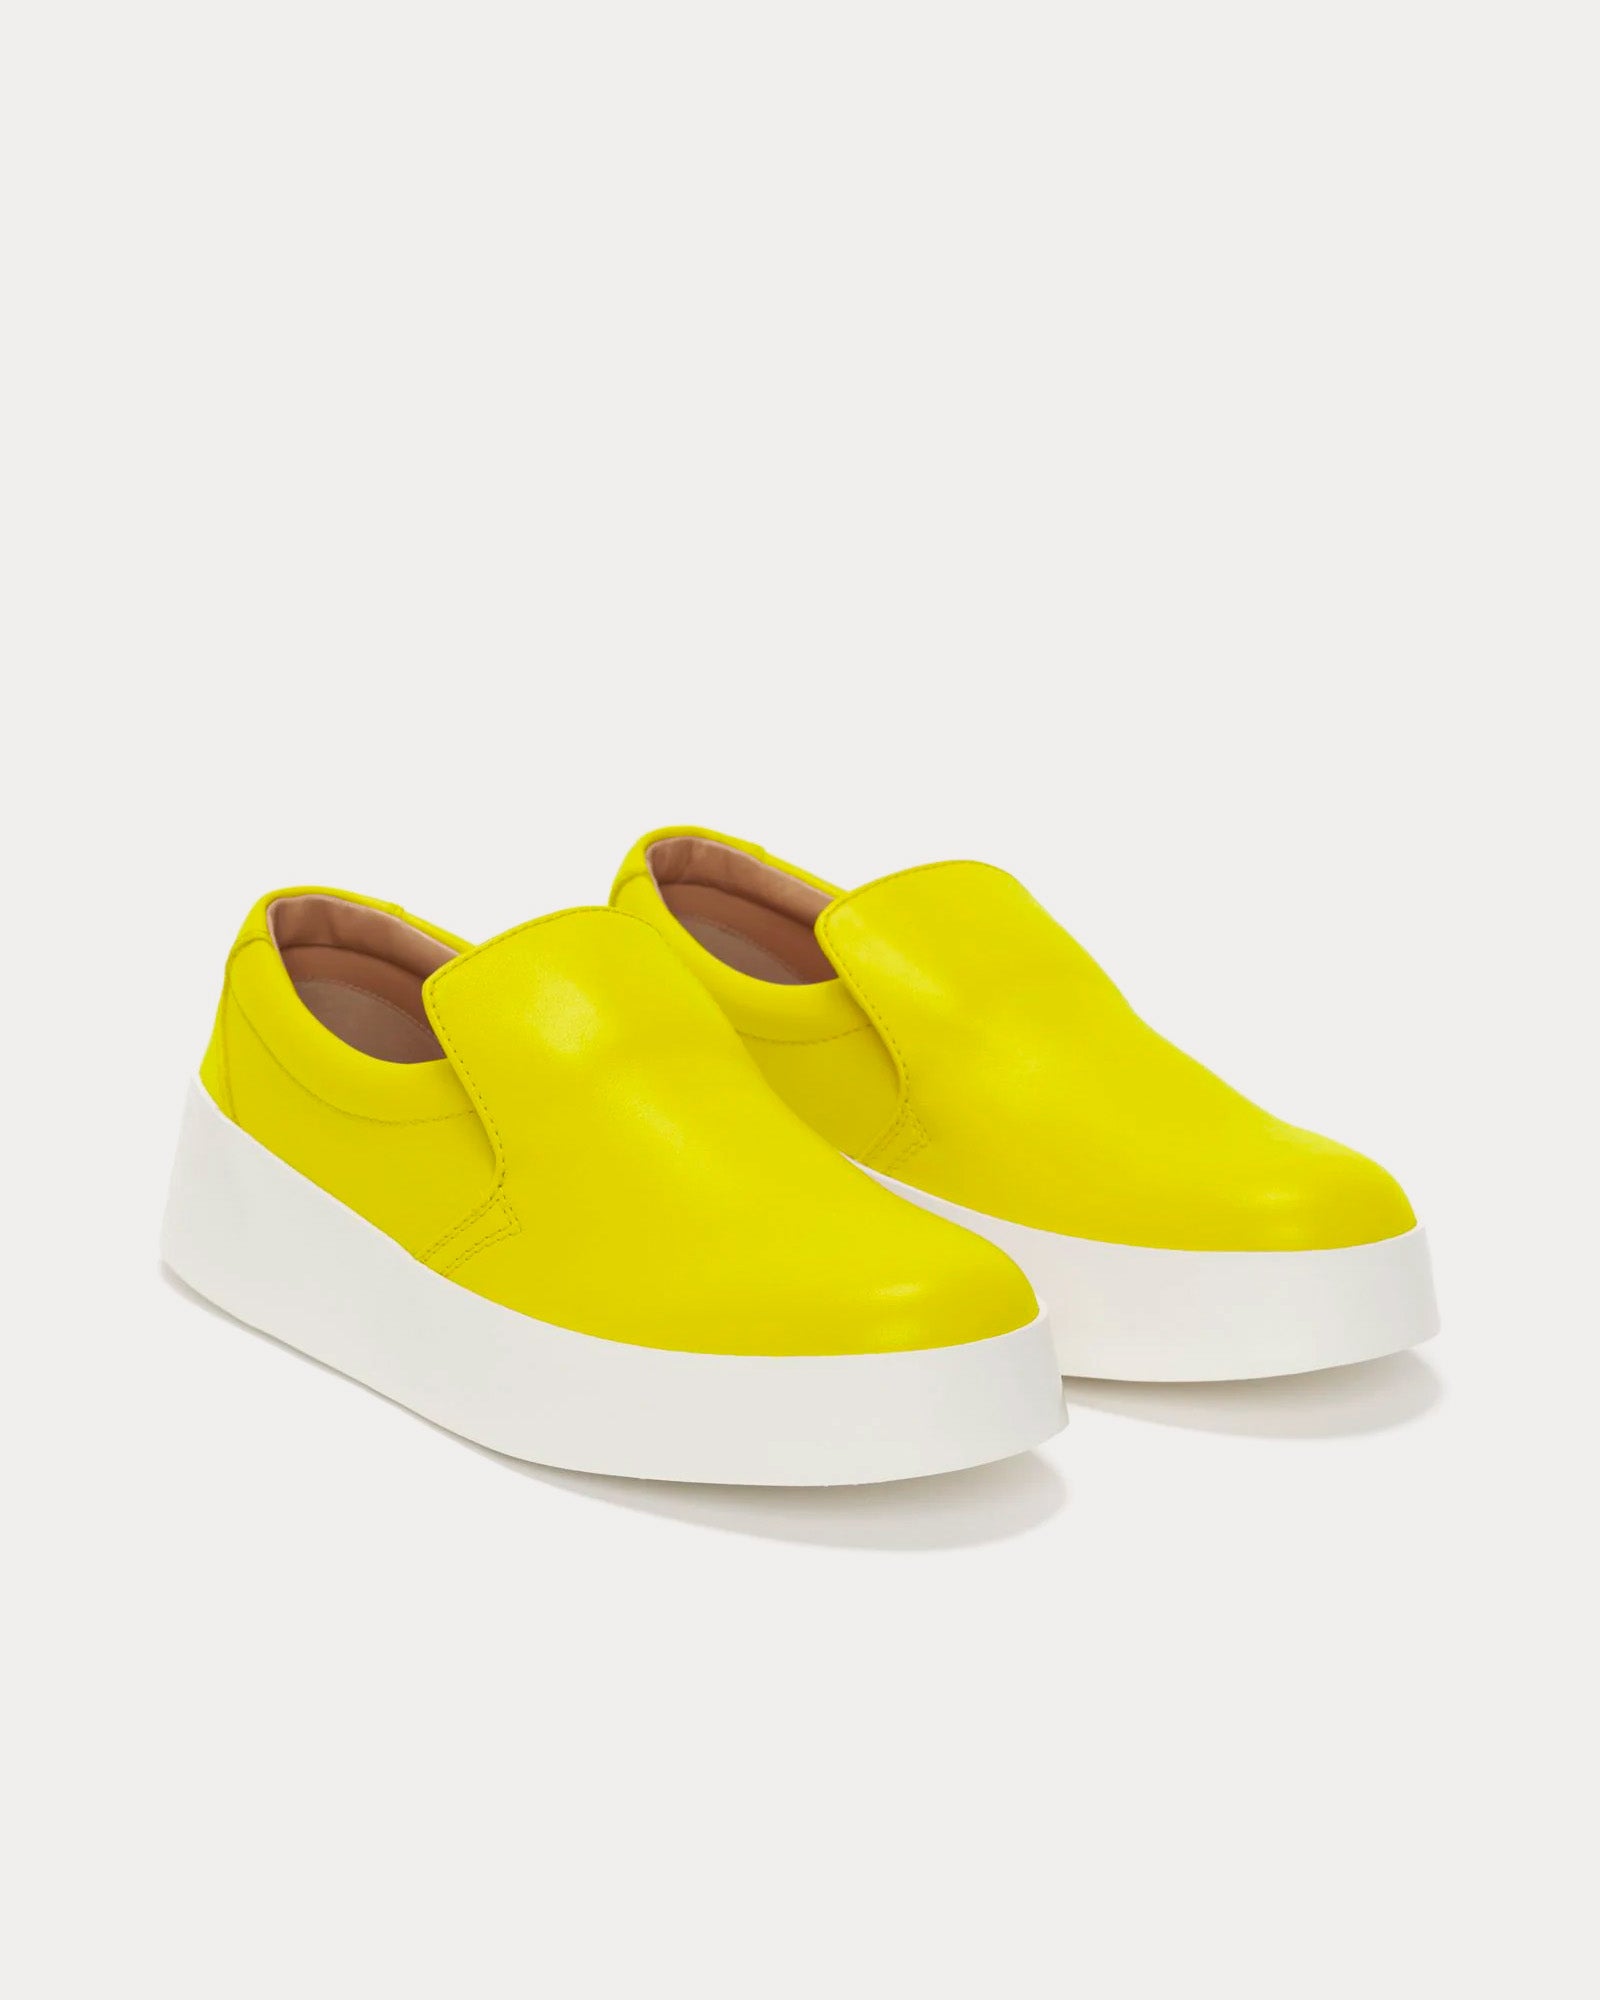 JW Anderson - Smooth Leather Fluro Yellow Slip On Sneakers